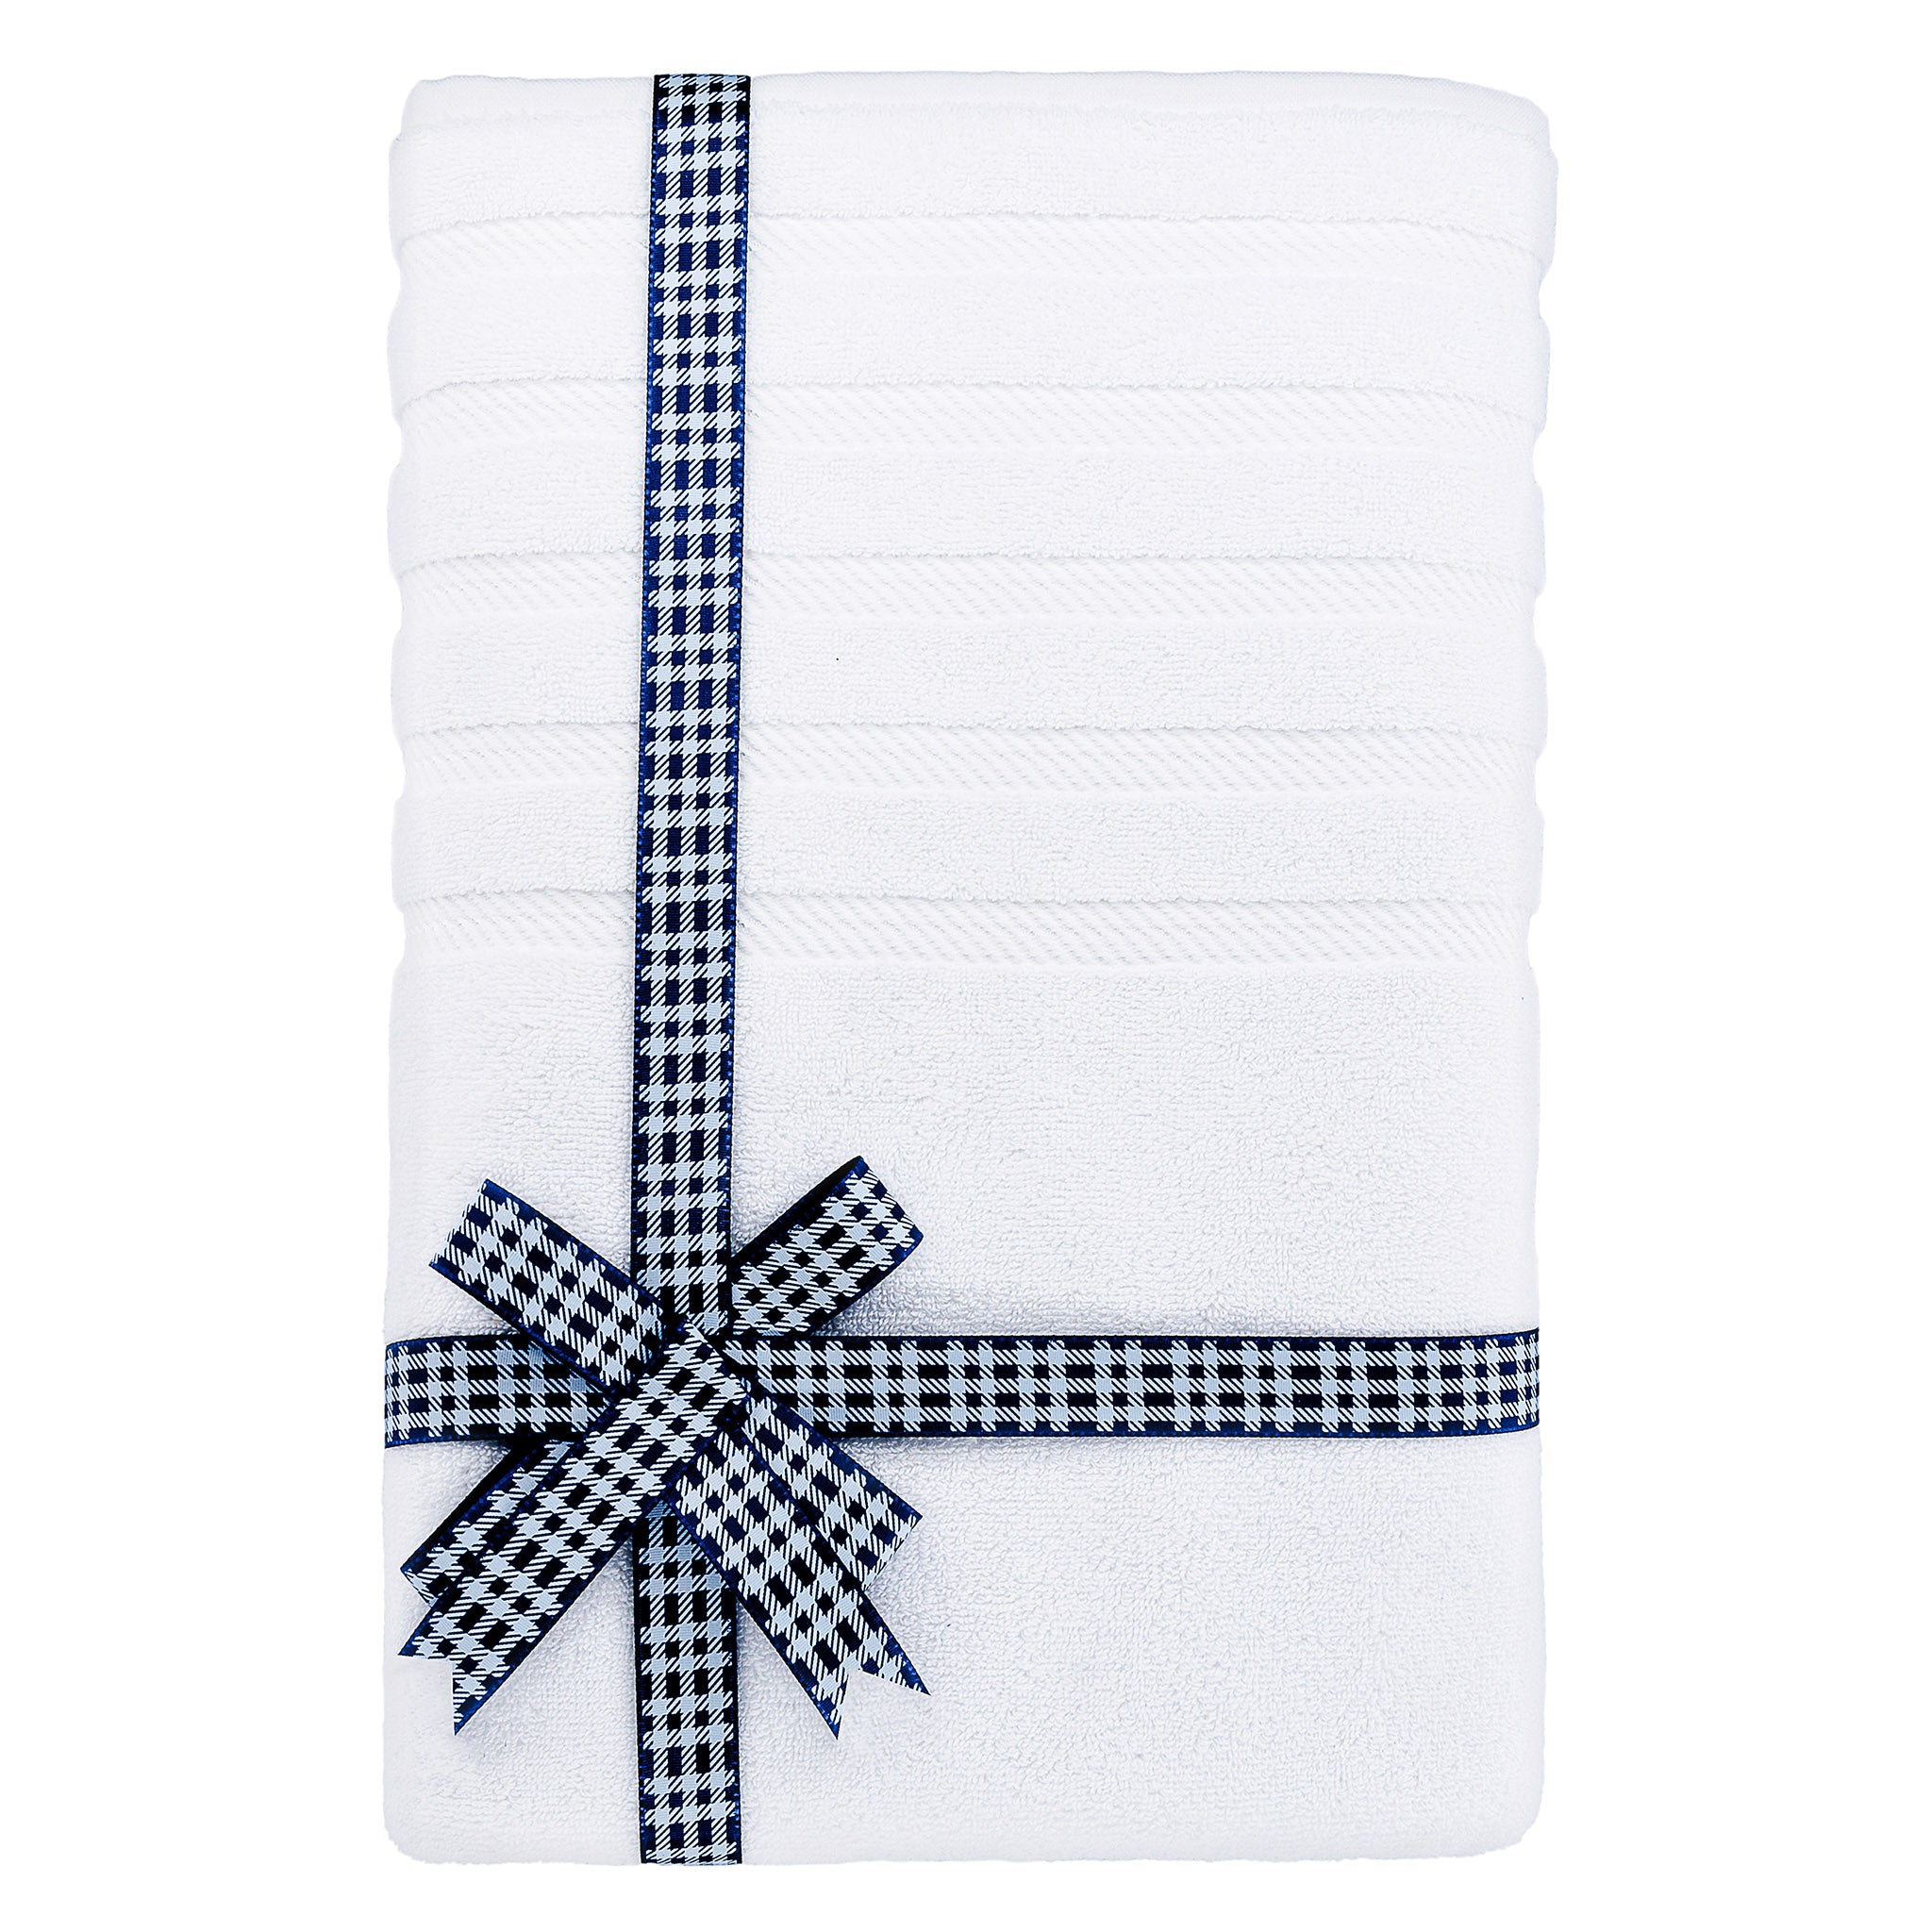 Wholesale Towels > 35x70 - White Full Terry Oversized Large Bath Sheet  Towels Heavy Weight 100% Cotton